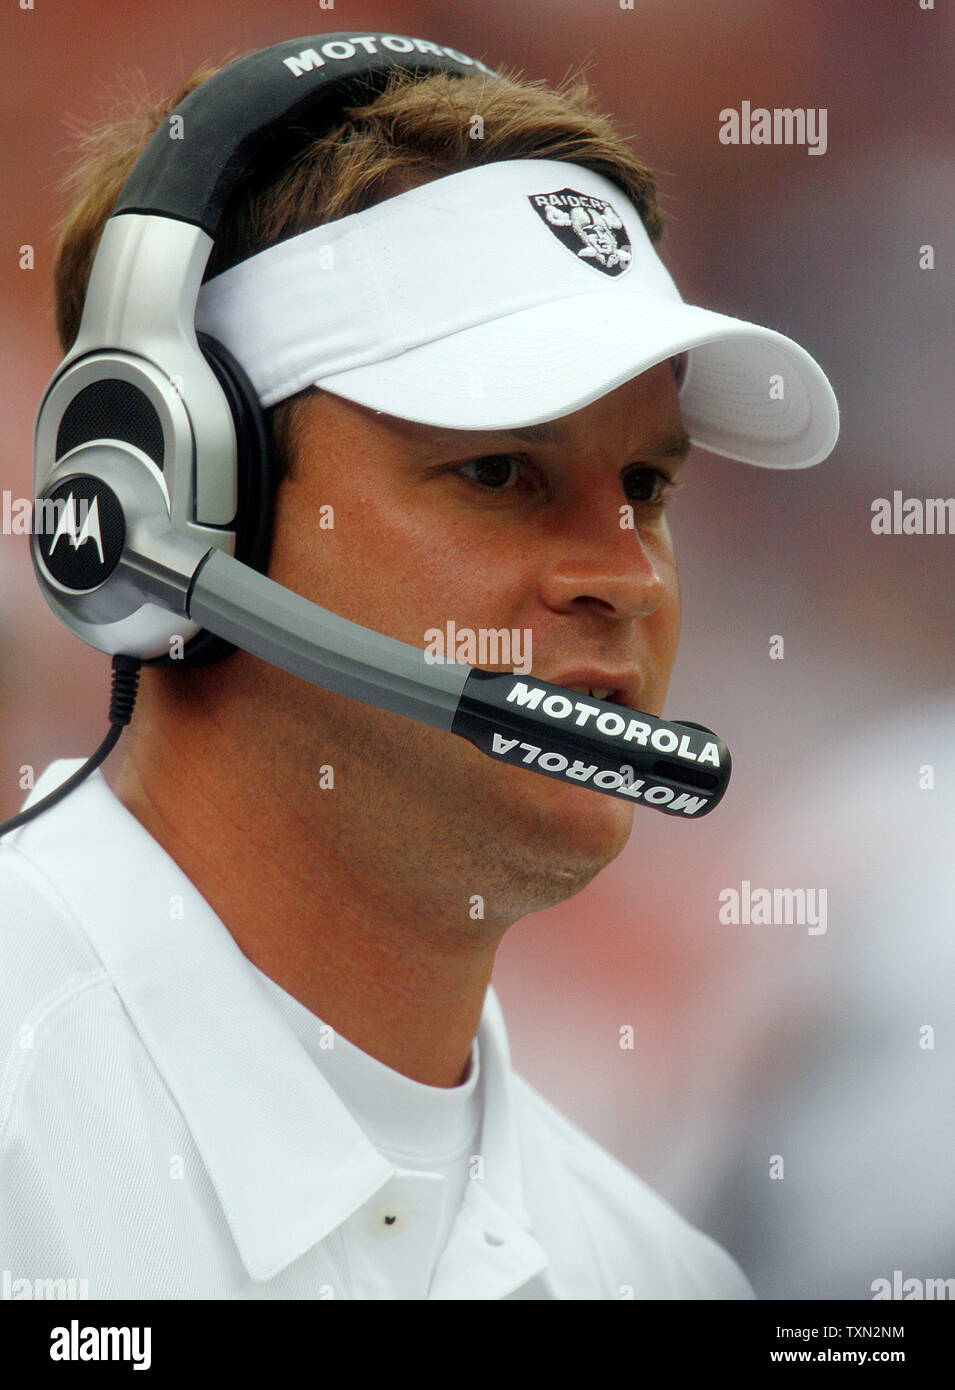 Oakland Raiders rookie head coach Lane Kiffin watches play against the Denver Broncos at Invesco Field at Mile High in Denver on September 16, 2007.   Denver beat Oakland 23-20 in overtime.  (UPI Photo/Gary C. Caskey) Stock Photo